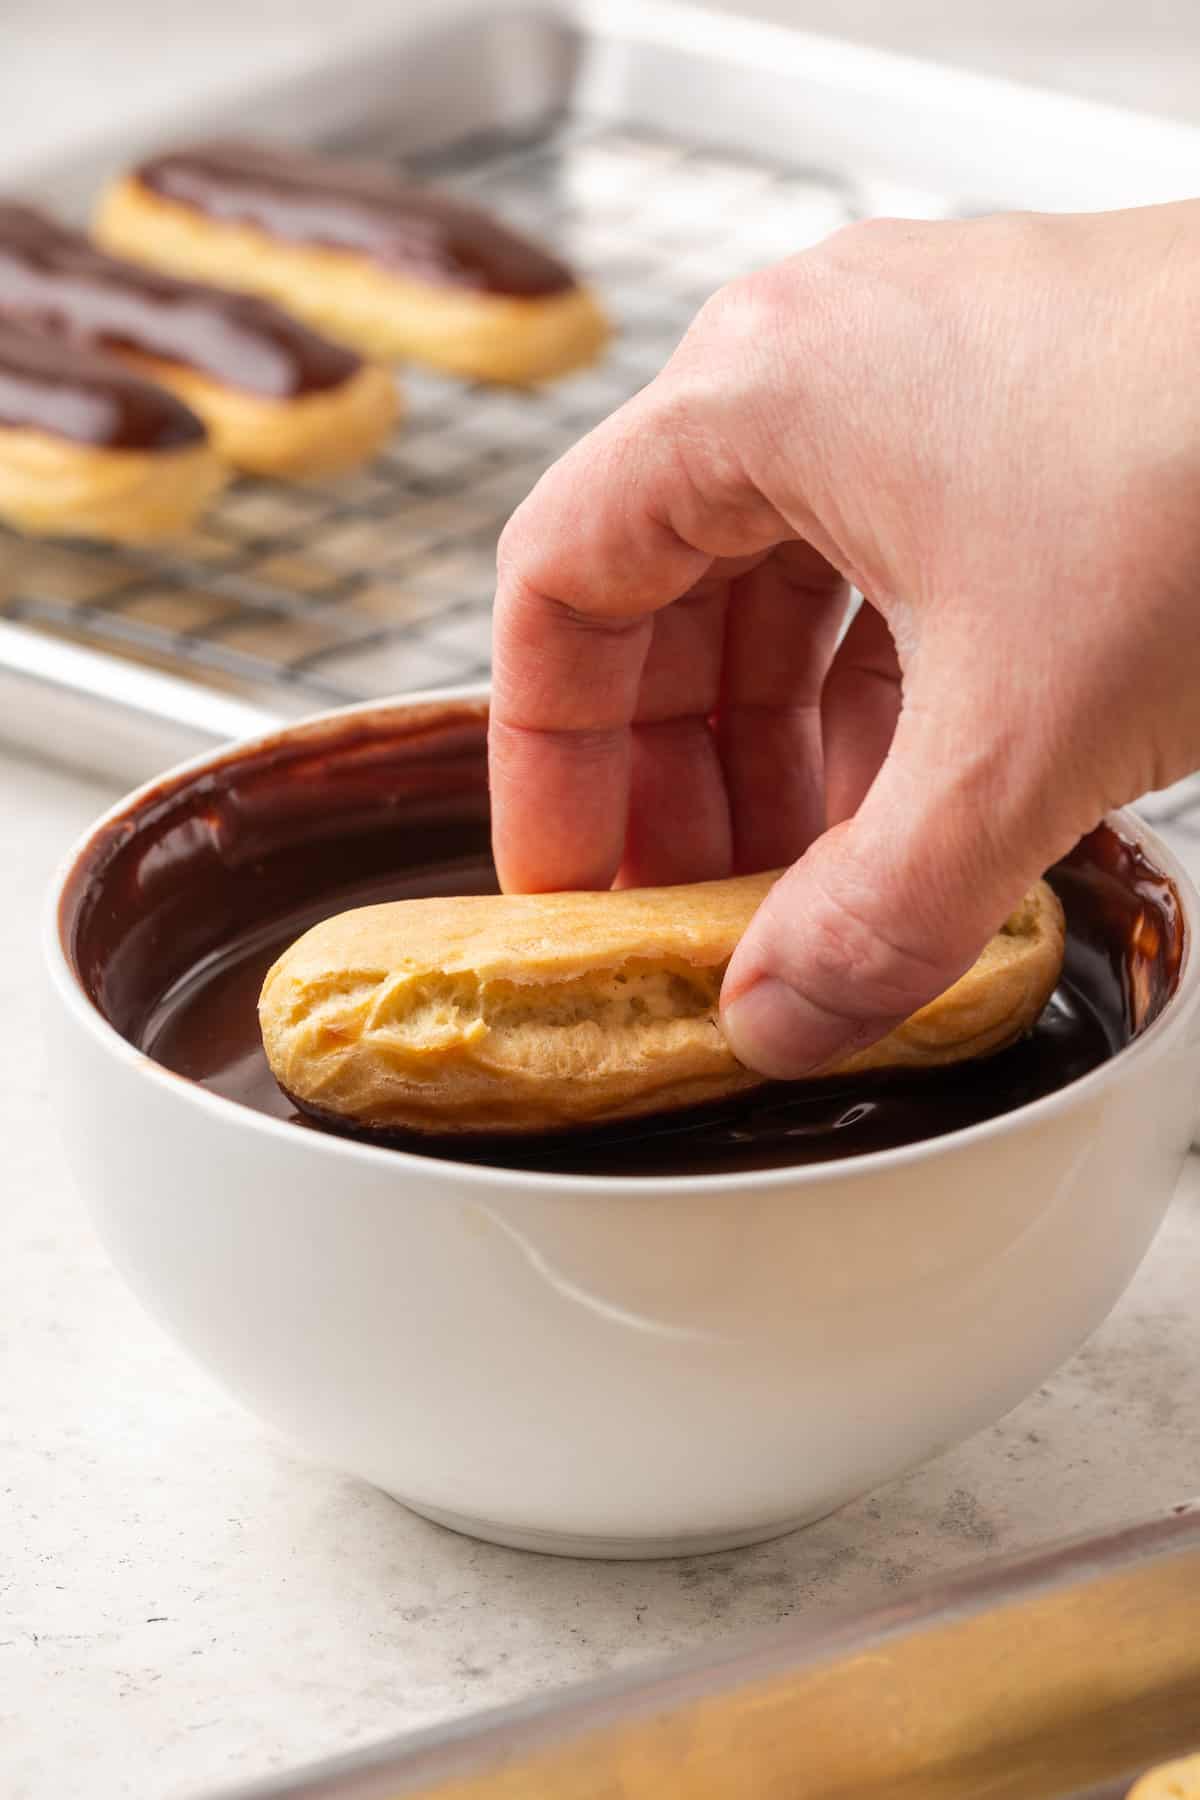 A hand dips a gluten-free eclair into a white bowl of chocolate glaze.